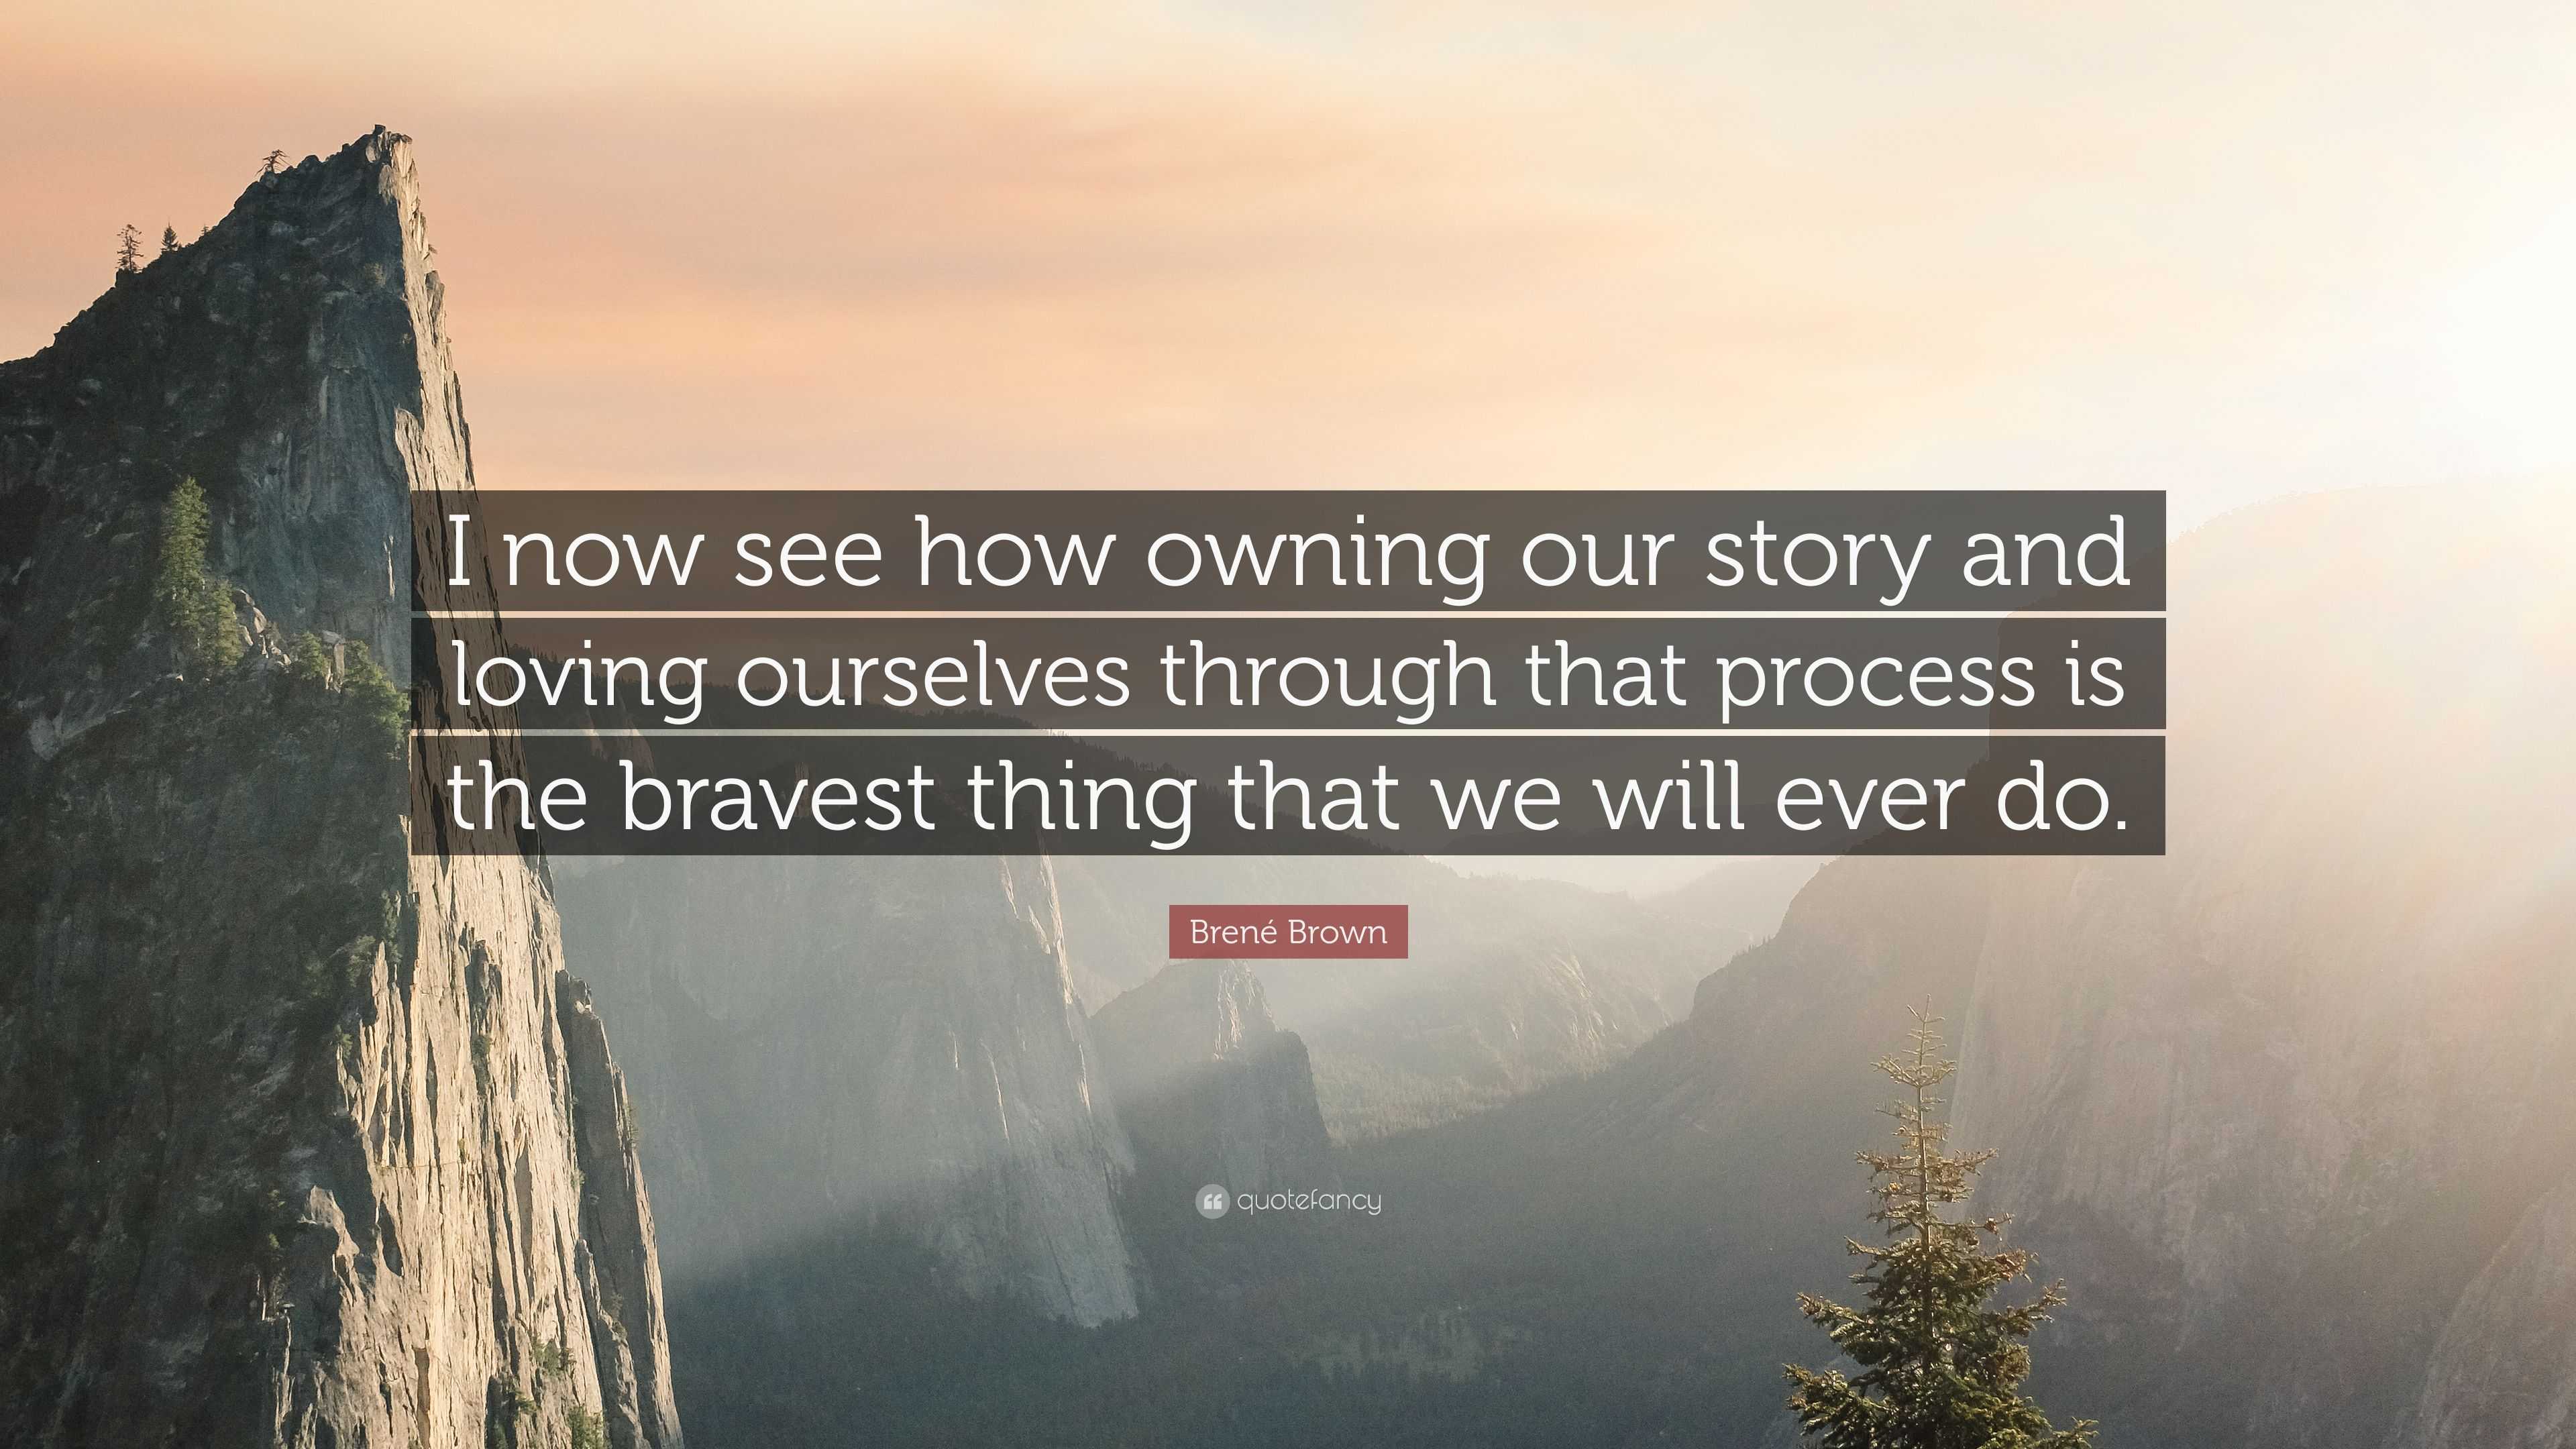 Brené Brown Quote: “I now see how owning our story and loving